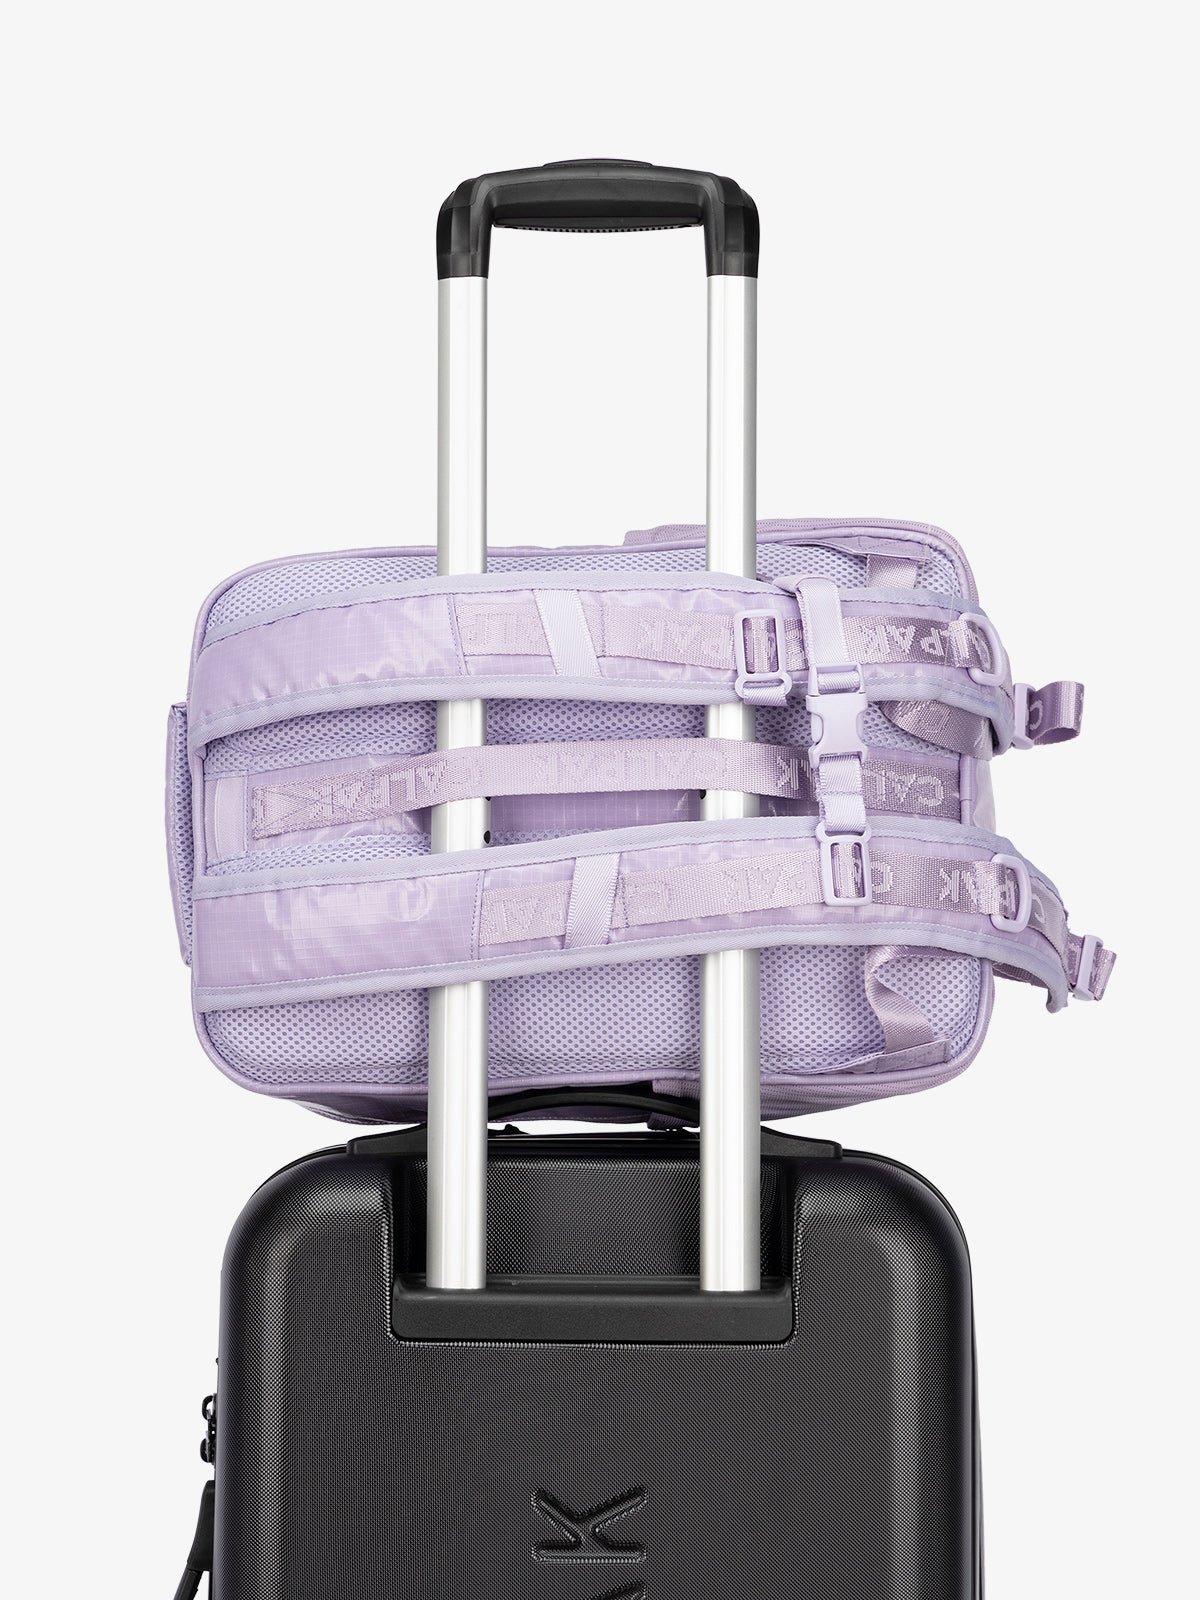 CALPAK hydration backpack with luggage trolley strap and and adjustable shoulder straps in light purple